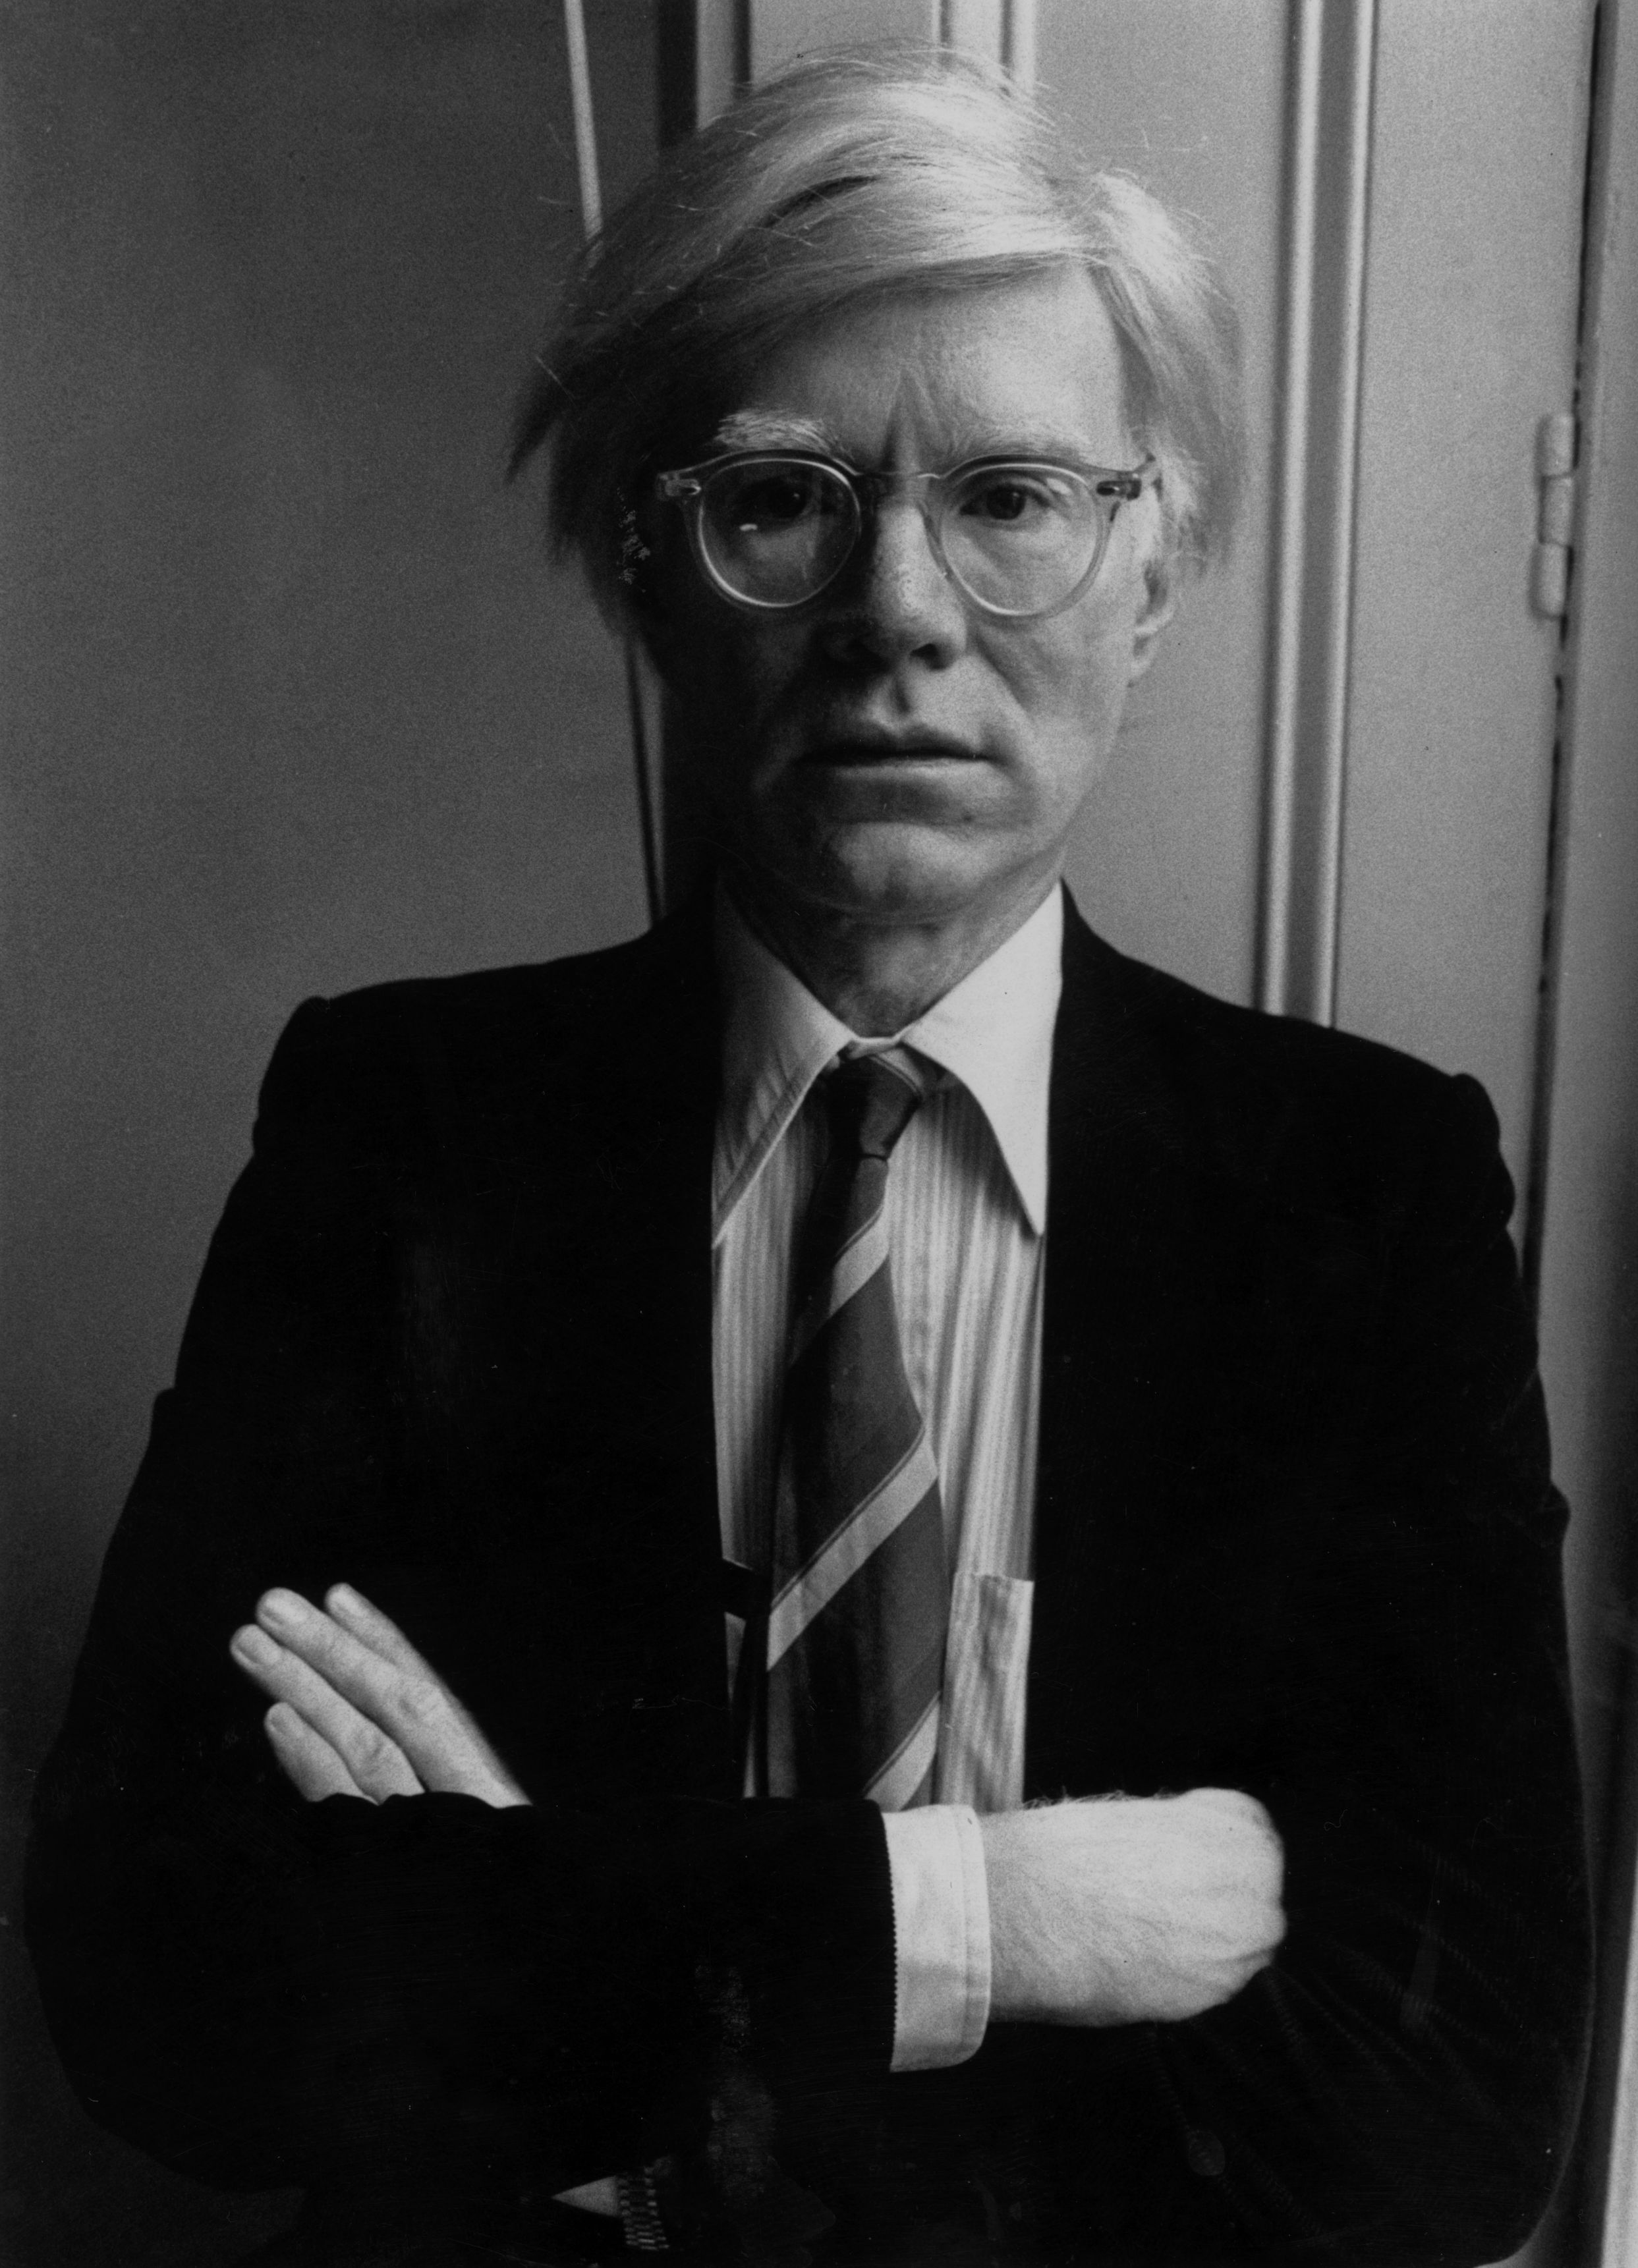 Andy Warhol - August 6, 1928 - February 22, 1987